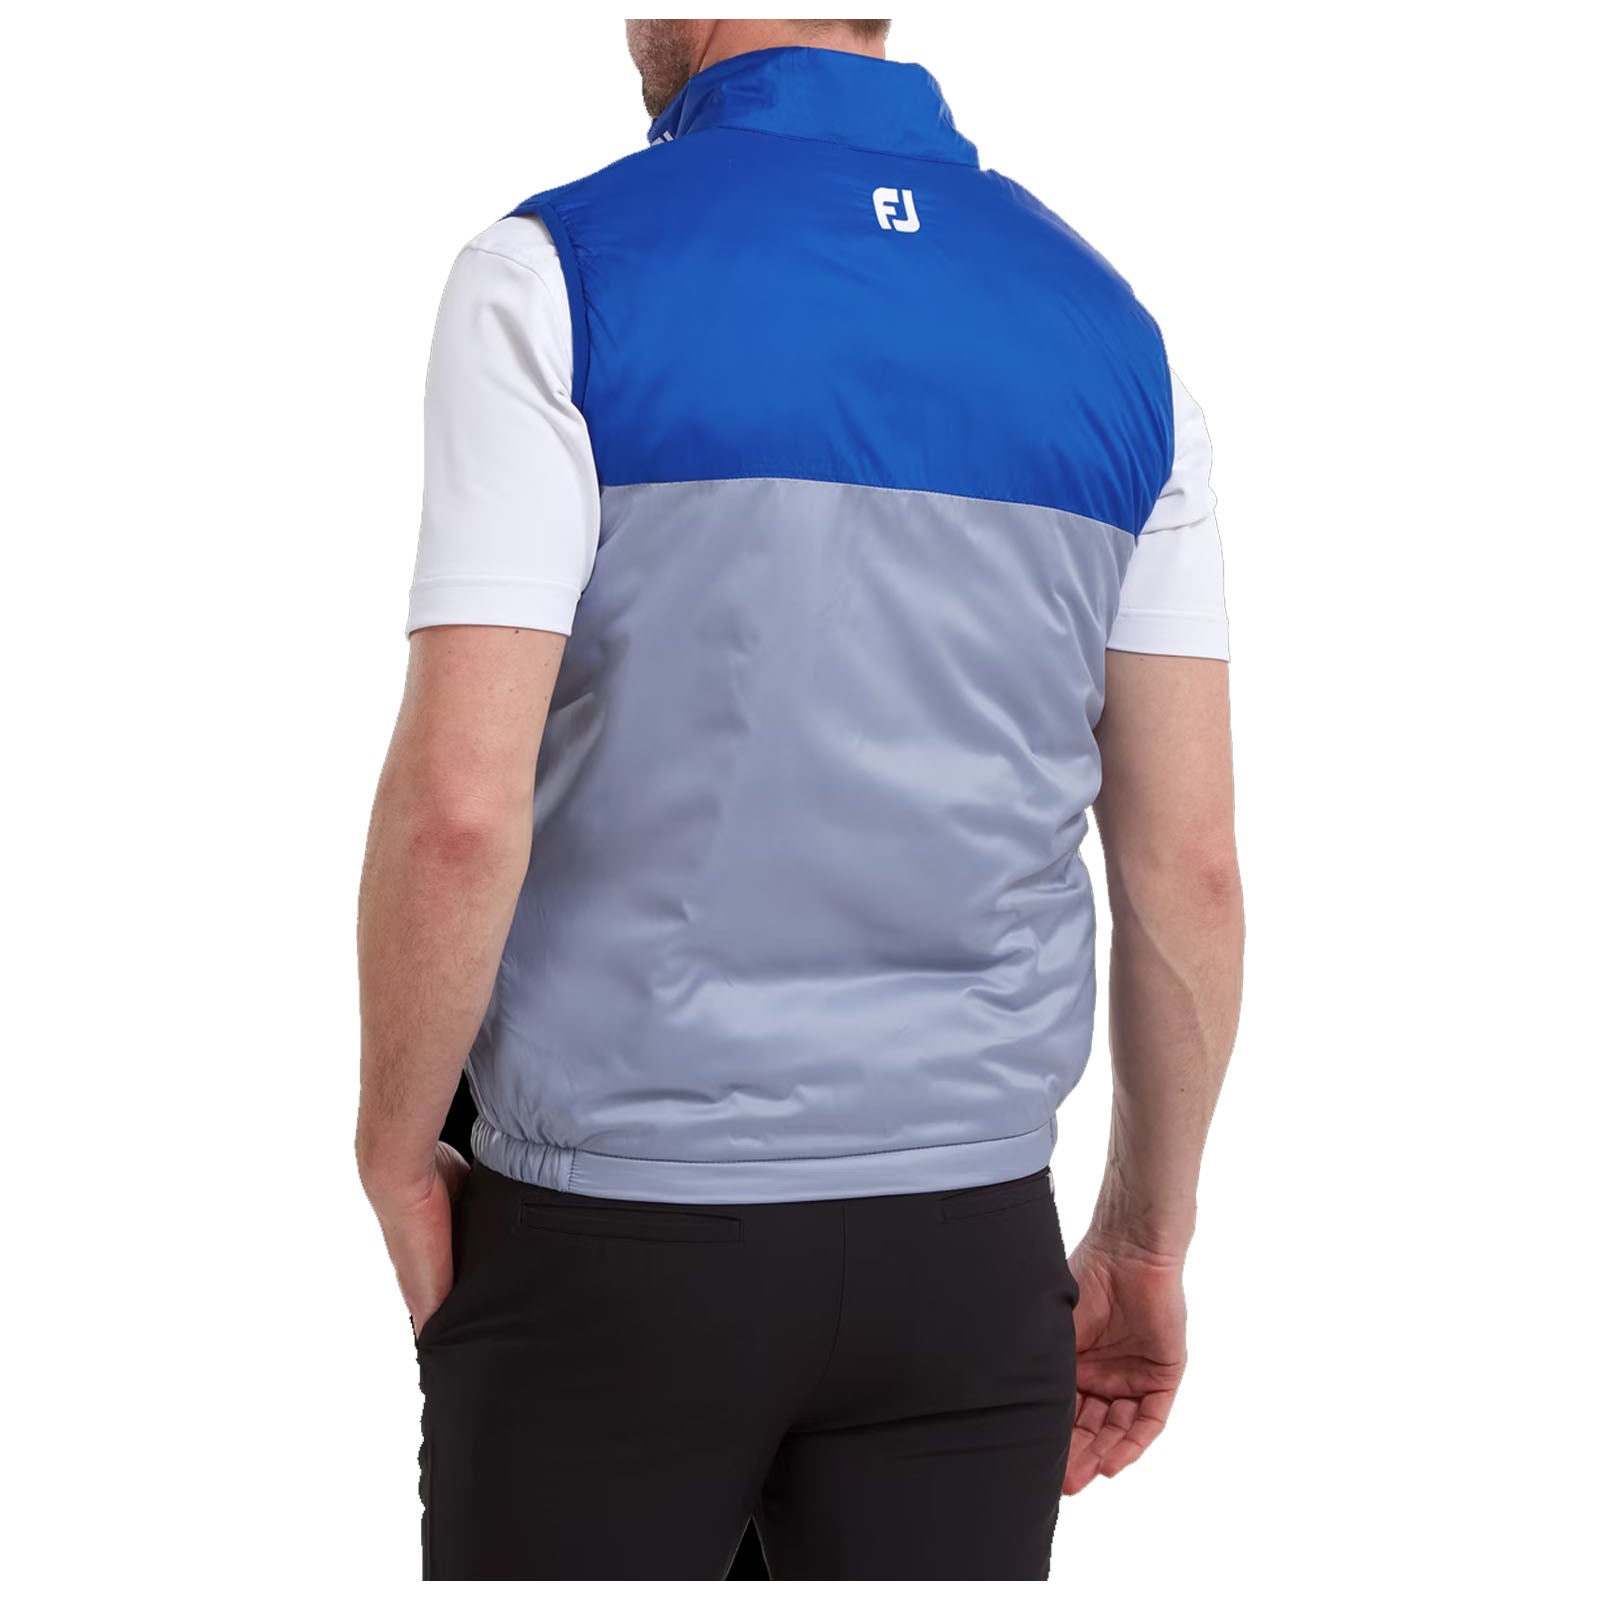 FootJoy Mens Thermal Insulated Vest